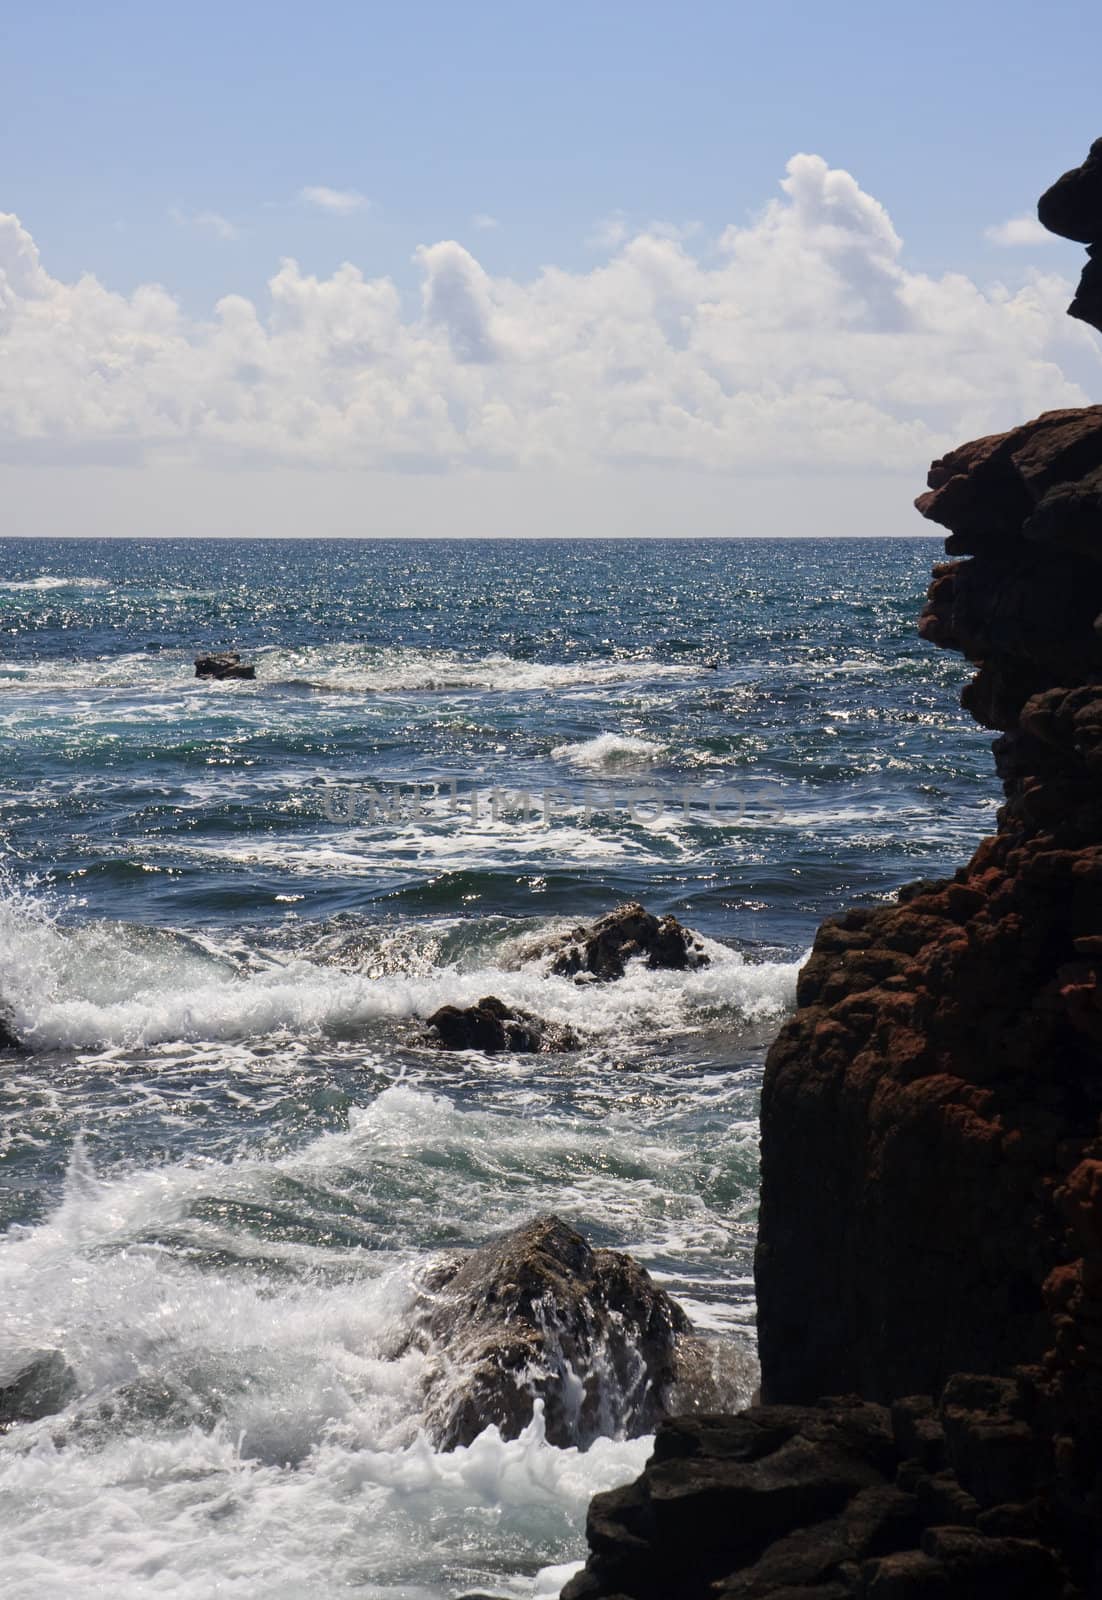 Rocky headland and raging ocean by steheap